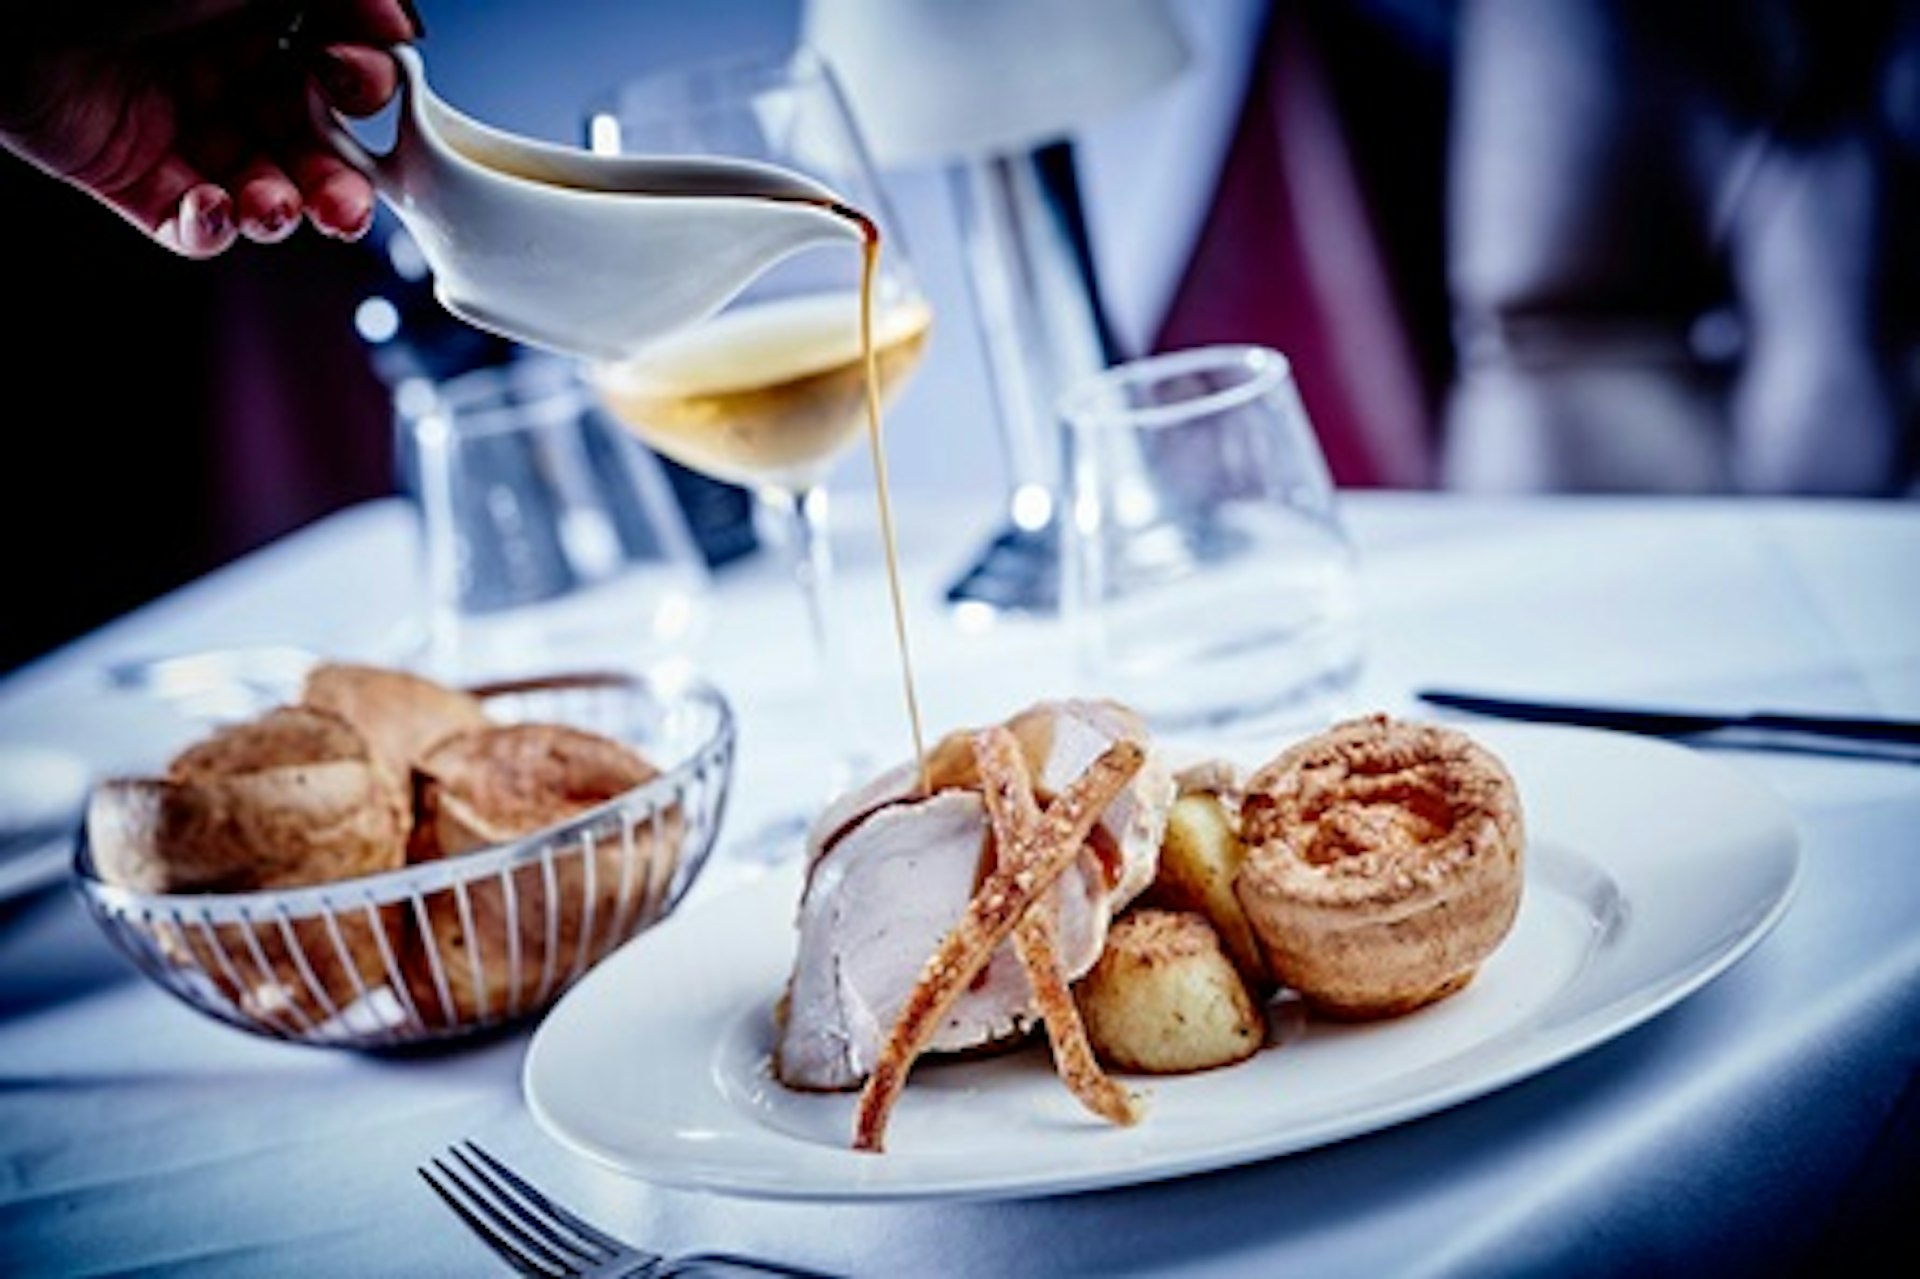 Two Course Meal with Prosecco for Two at Marco Pierre White Restaurant, Birmingham 1